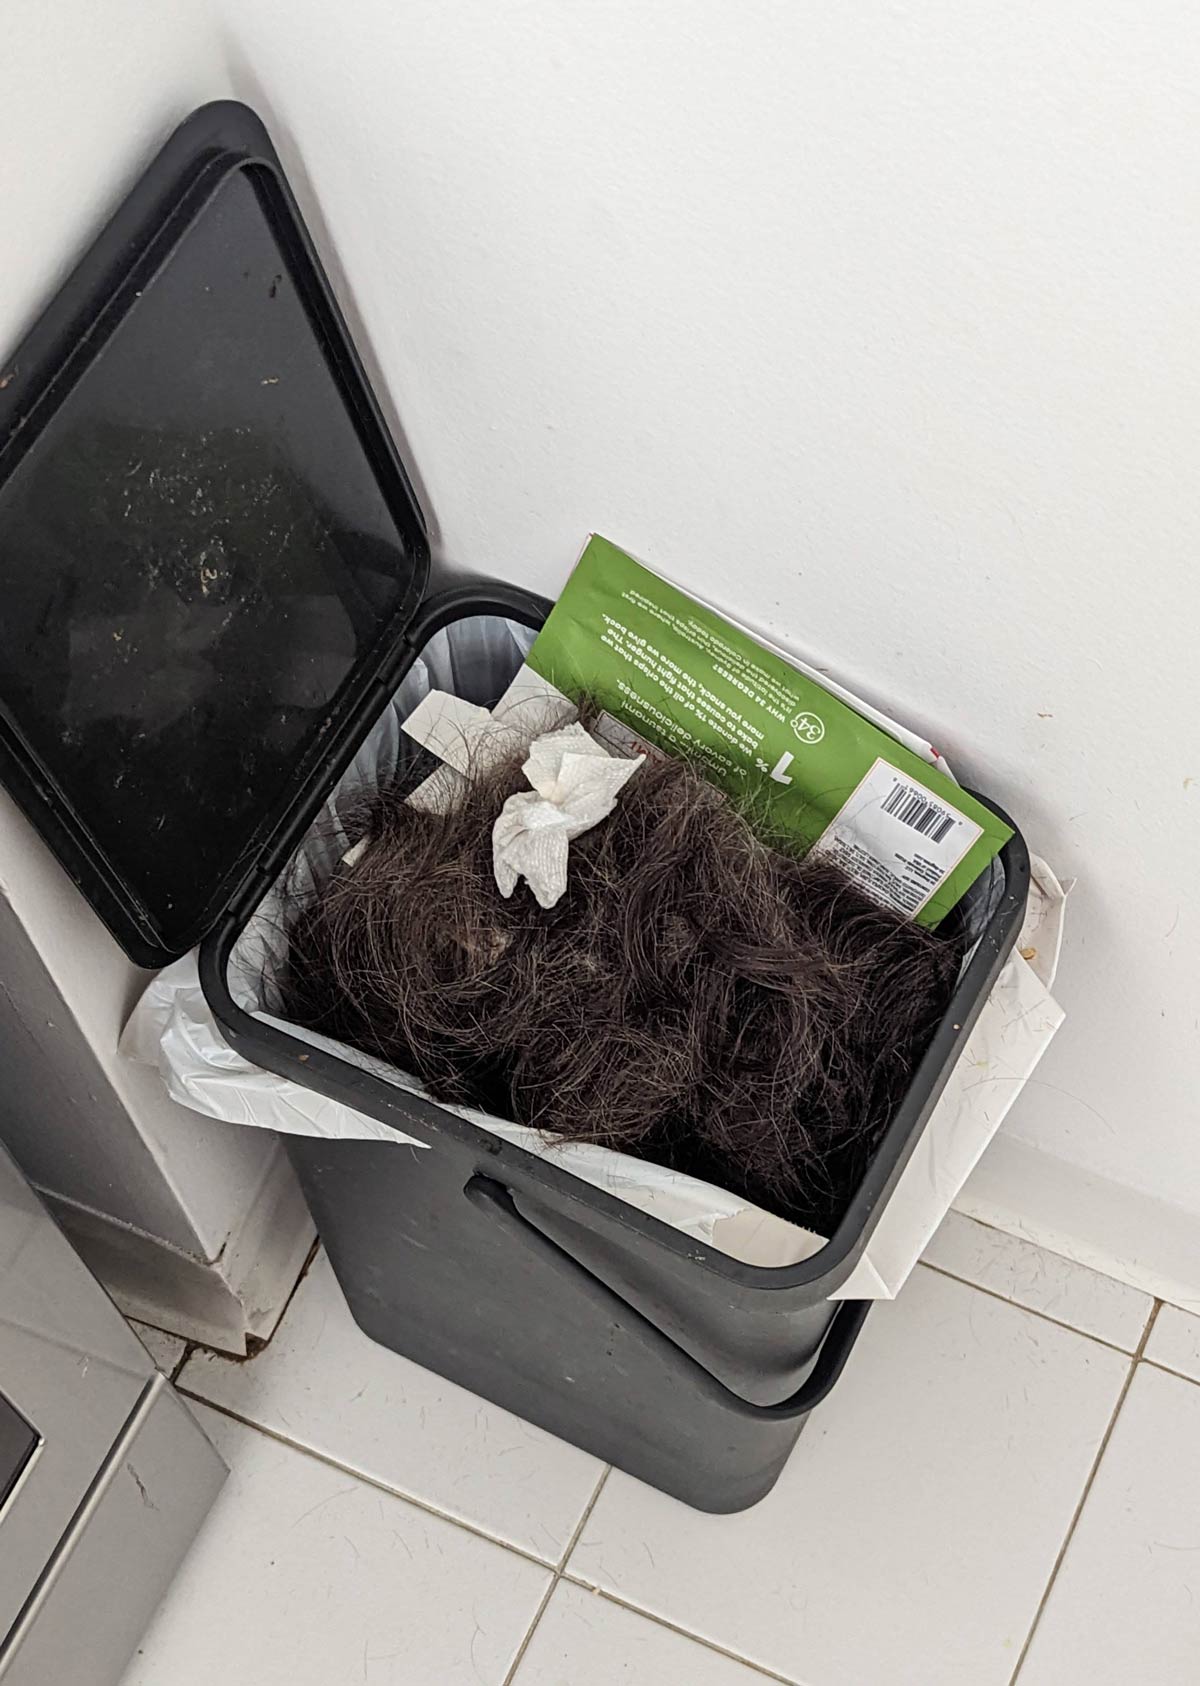 Wife cut her own hair today, almost gave me a heart attack upon opening the trash can